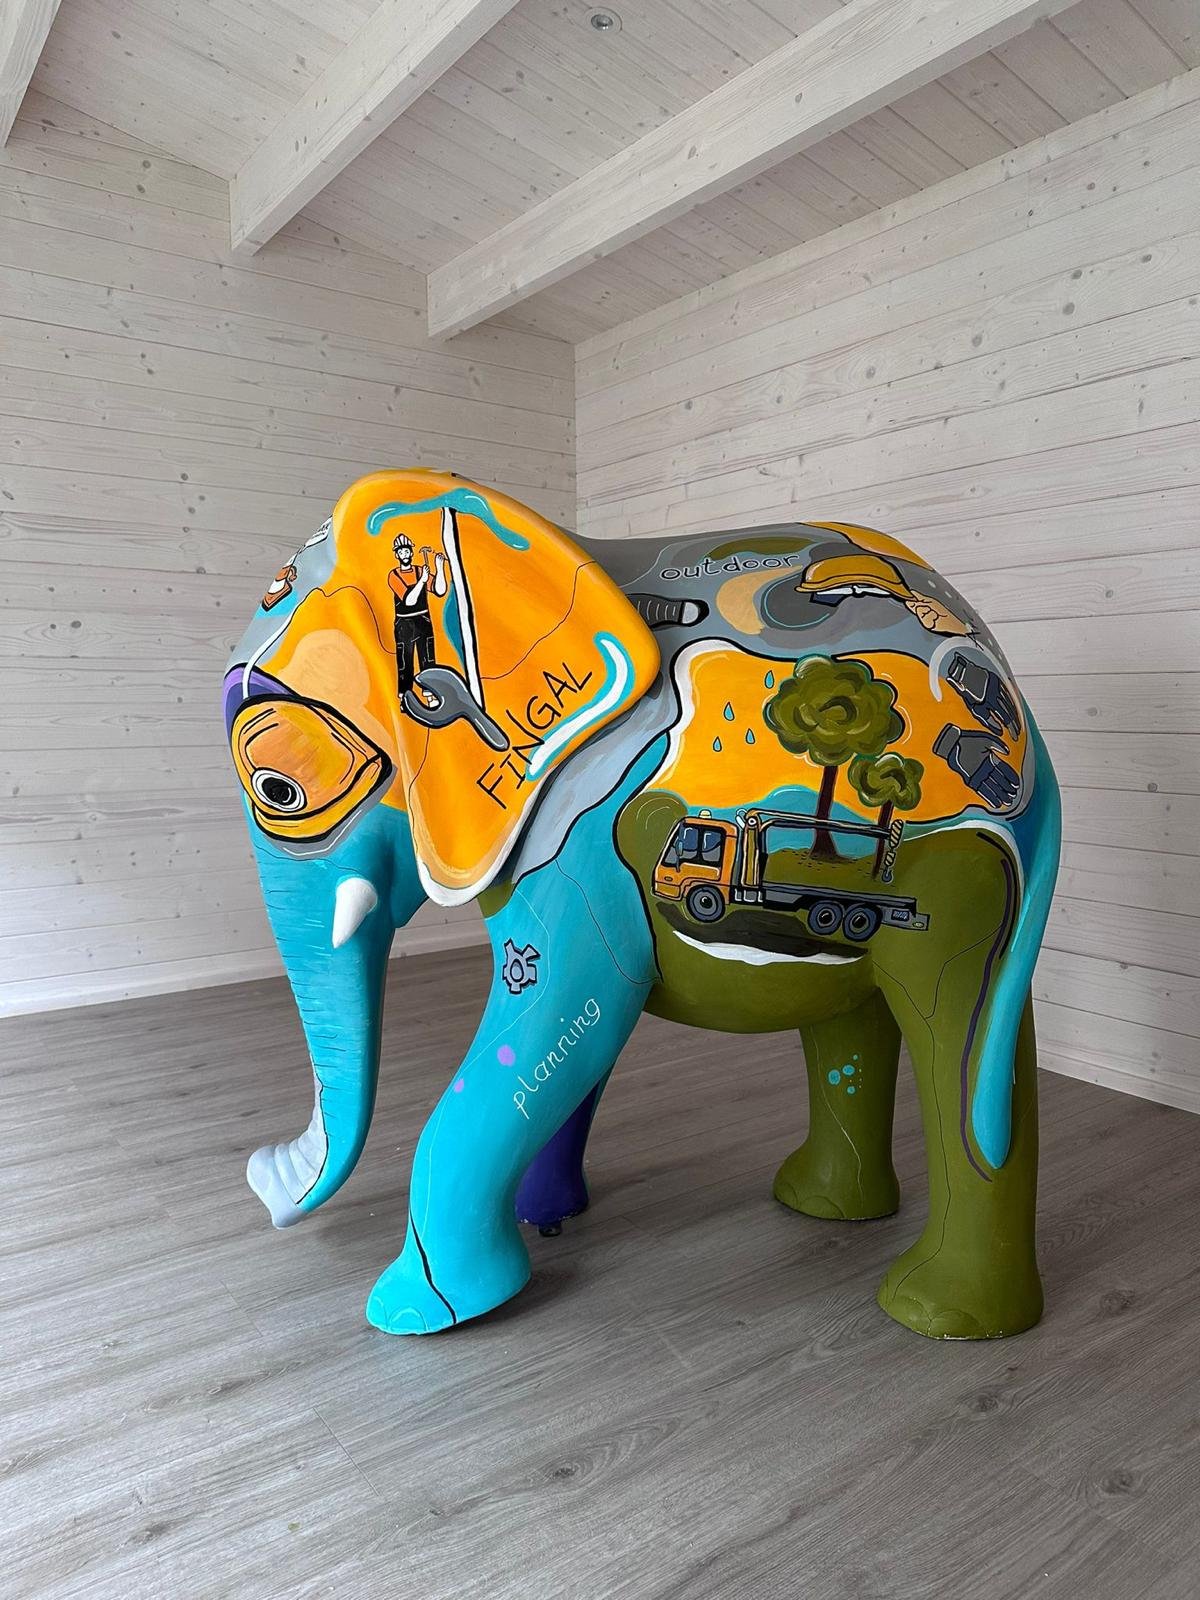 As the brush strokes glide across the canvas, artist Karolina Di Duca&rsquo;s latest elephant sculpture is coming to life, soon to grace the Watery Lane Operations Depot in Swords. This masterpiece isn&rsquo;t just art&mdash;it&rsquo;s a statement fo